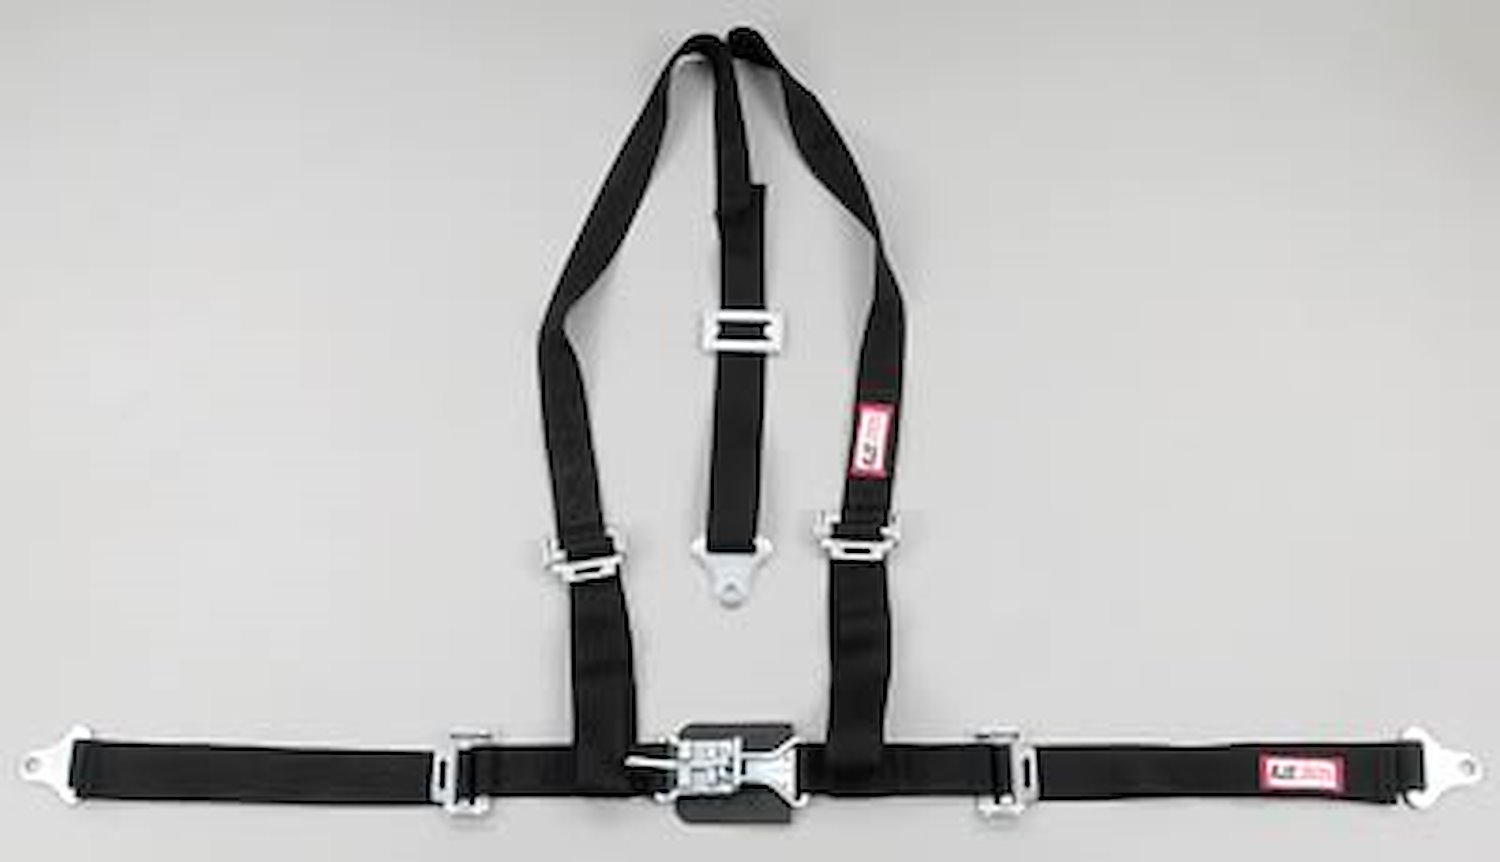 NON-SFI L&L HARNESS 2 PULL DOWN Lap Belt SNAP SEWN IN 2 S.H. Y FLOOR Mount w/STERNUM STRAP WRAP/BOLT RED